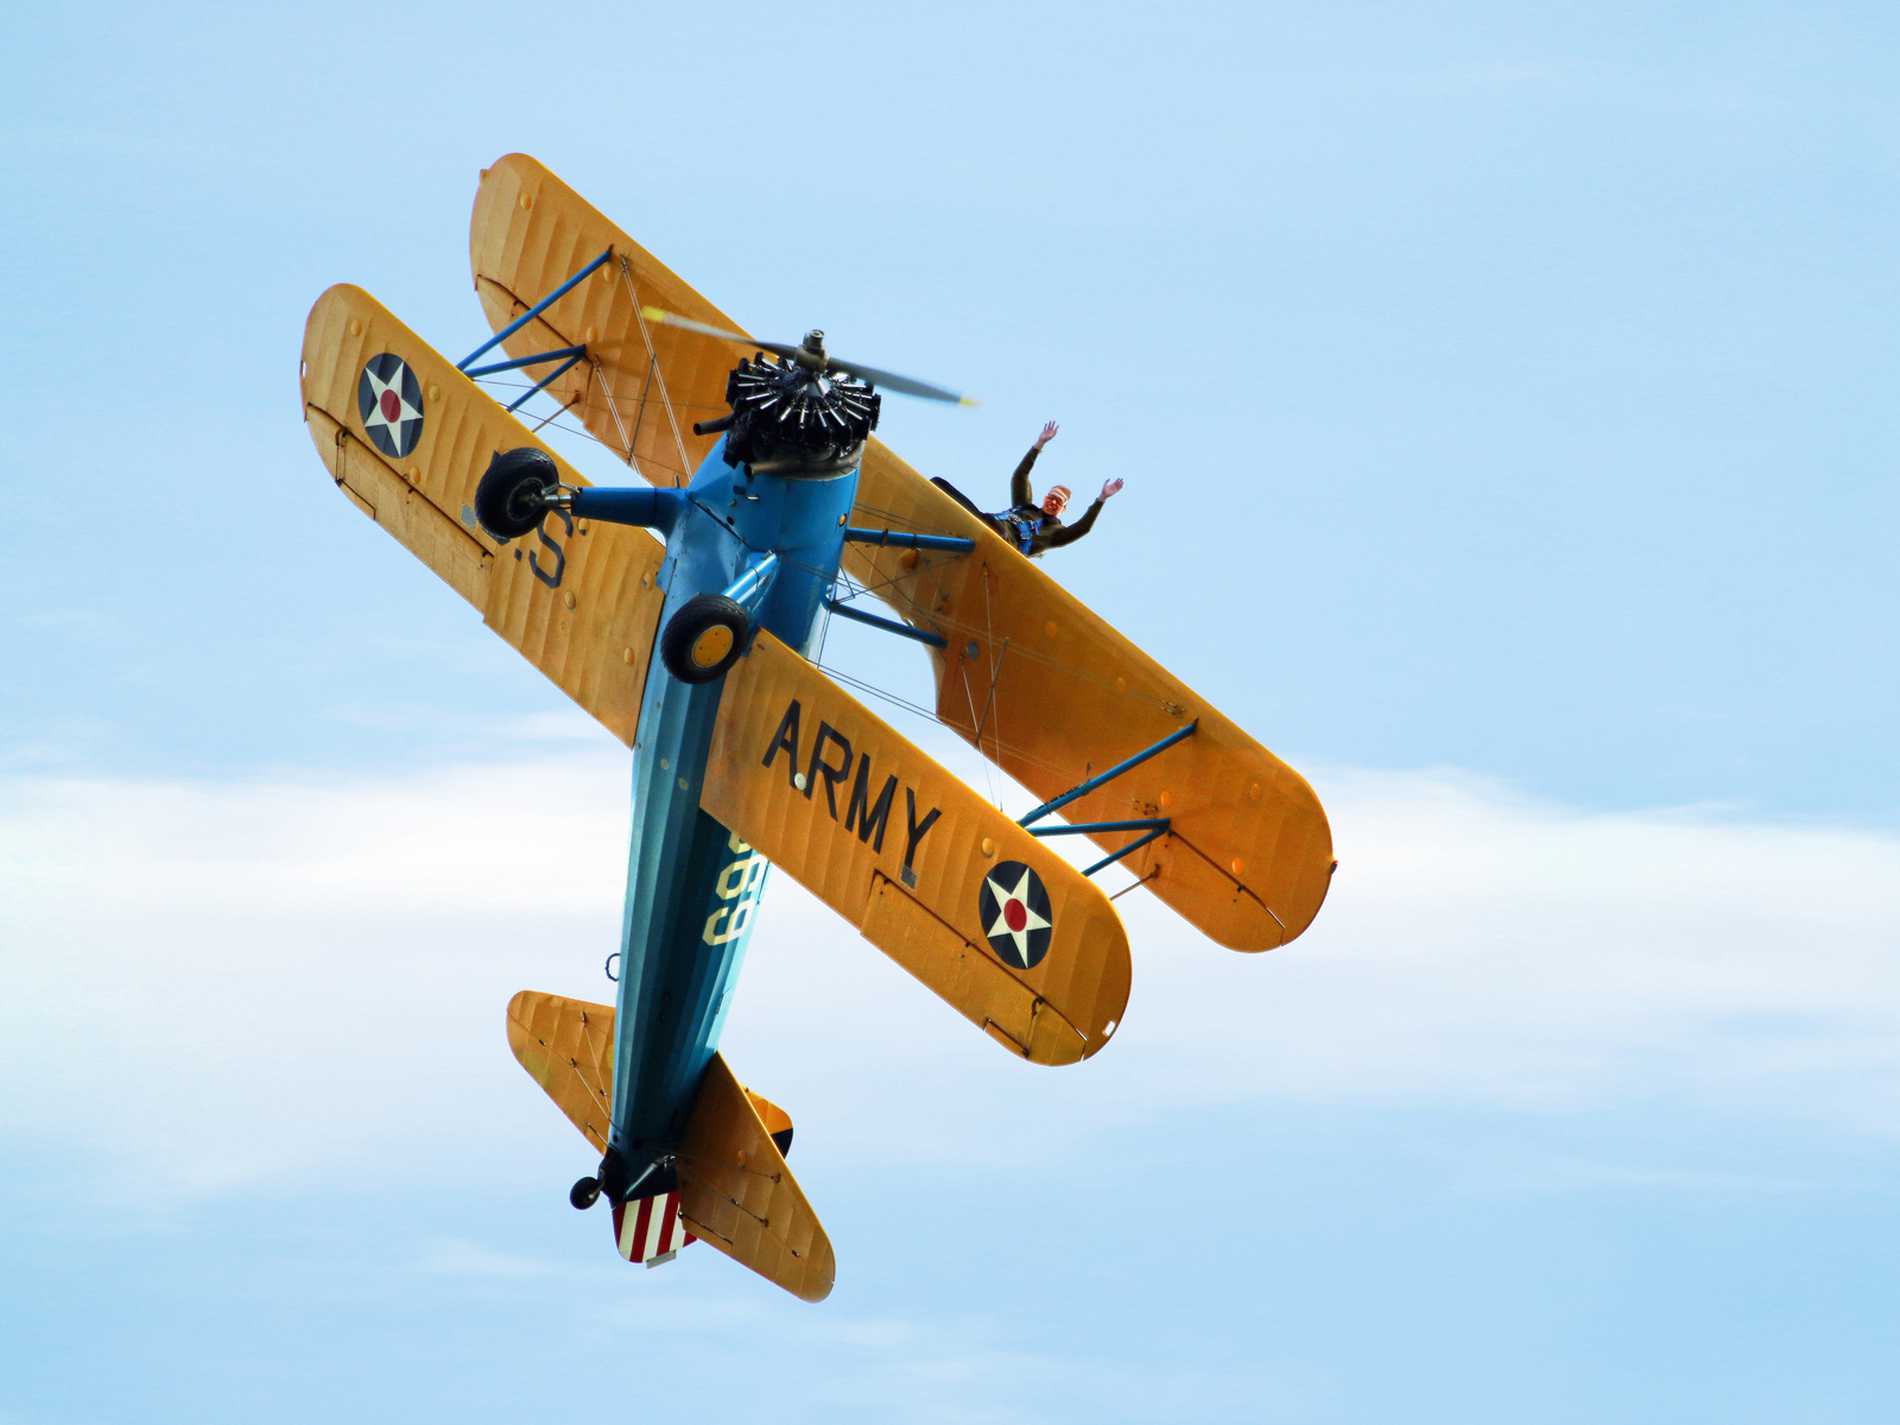 A bi-plane climbing vertically with a brave wing walker firmly attached.